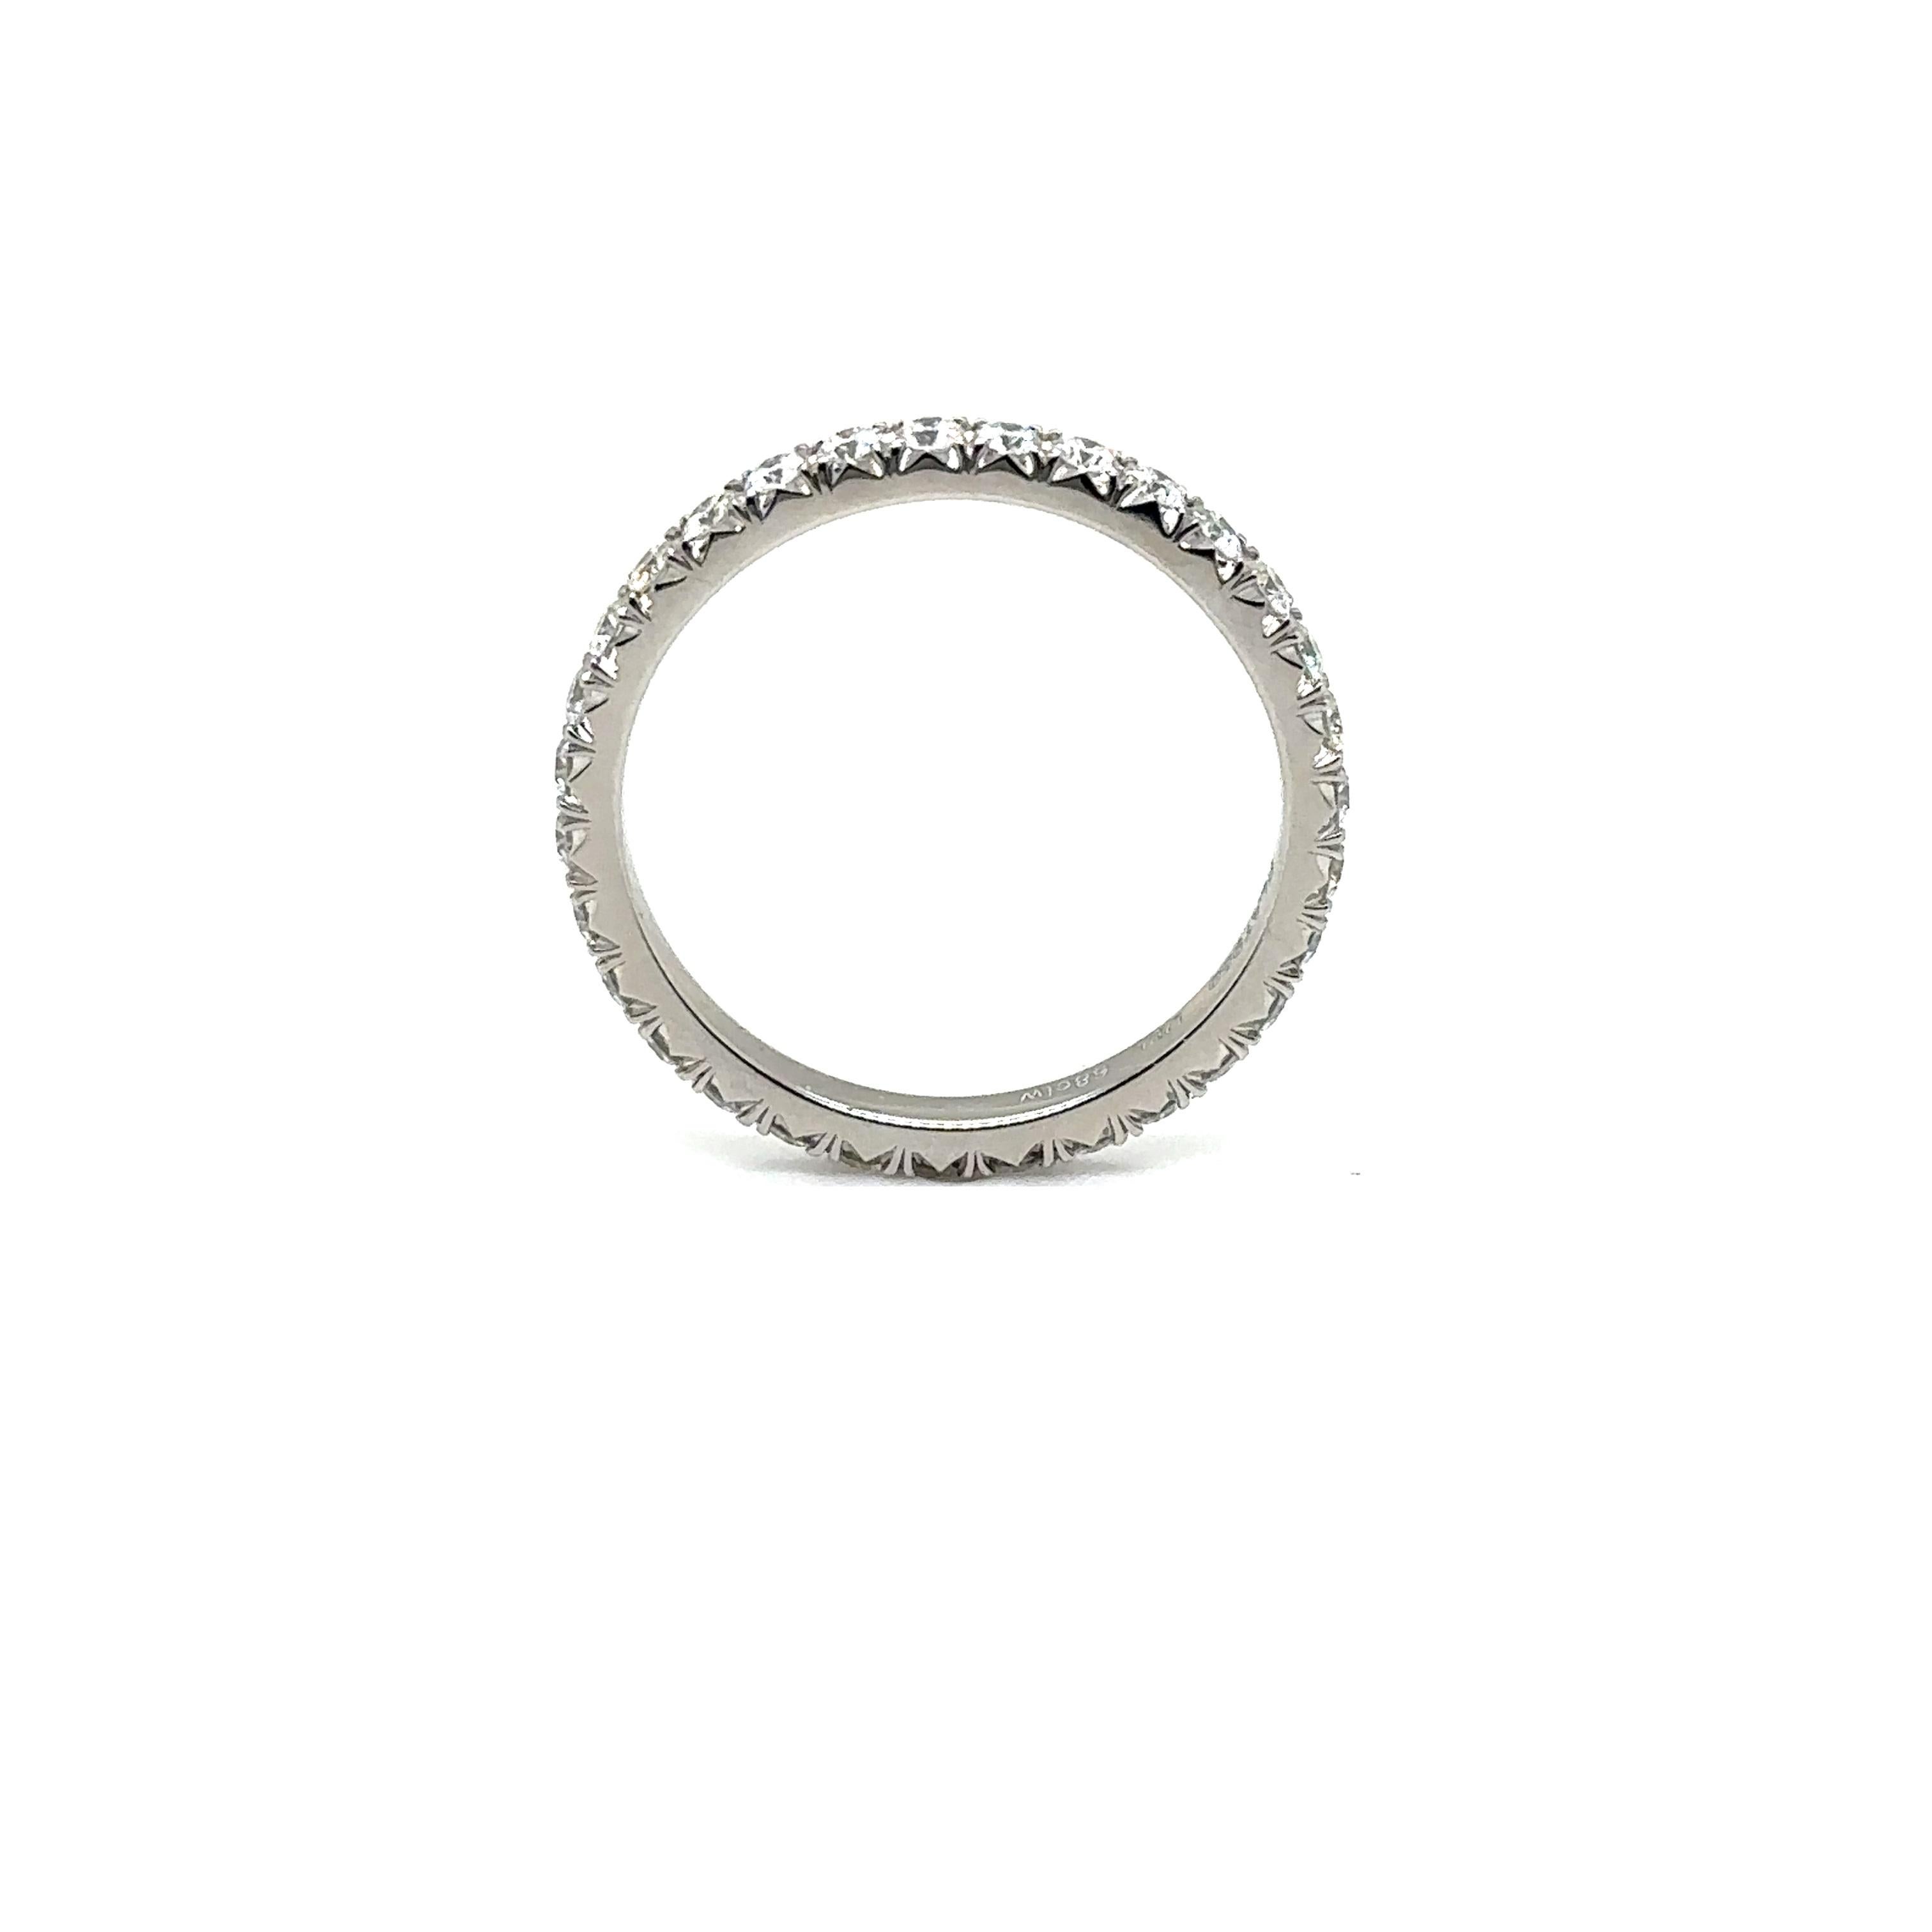 WB31 PLAT - PLATINUM WEDDING BAND with 0.68 CWT DIAMONDS For Sale 1